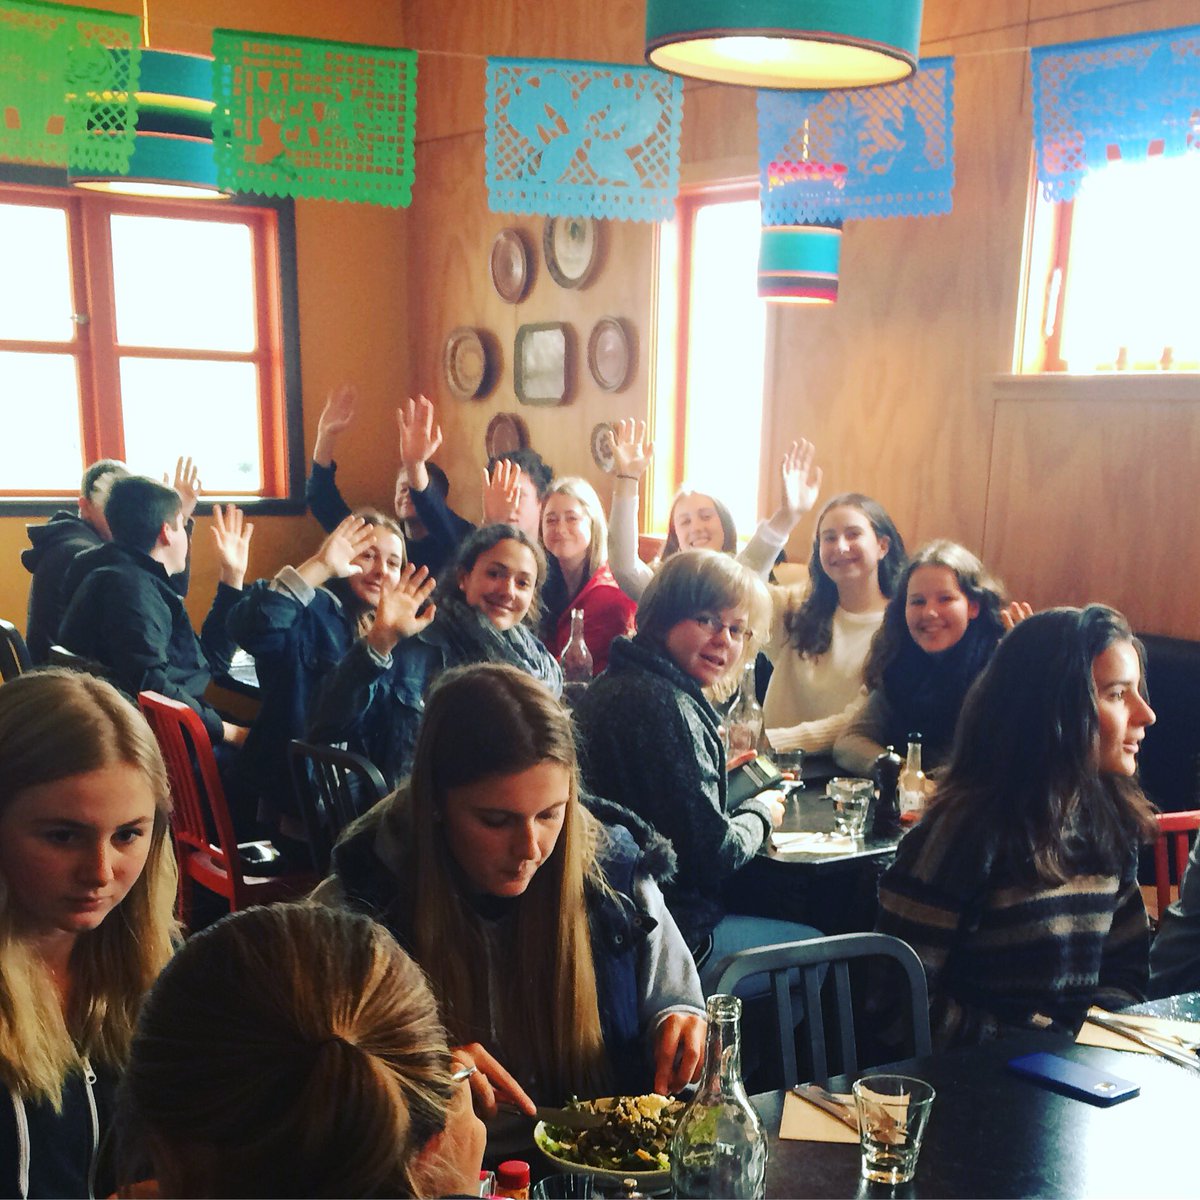 Que rico! Spanish students enjoying authentic Mexican food at @labocalocanz ! 👍🏼🌮 @PCPrincipal